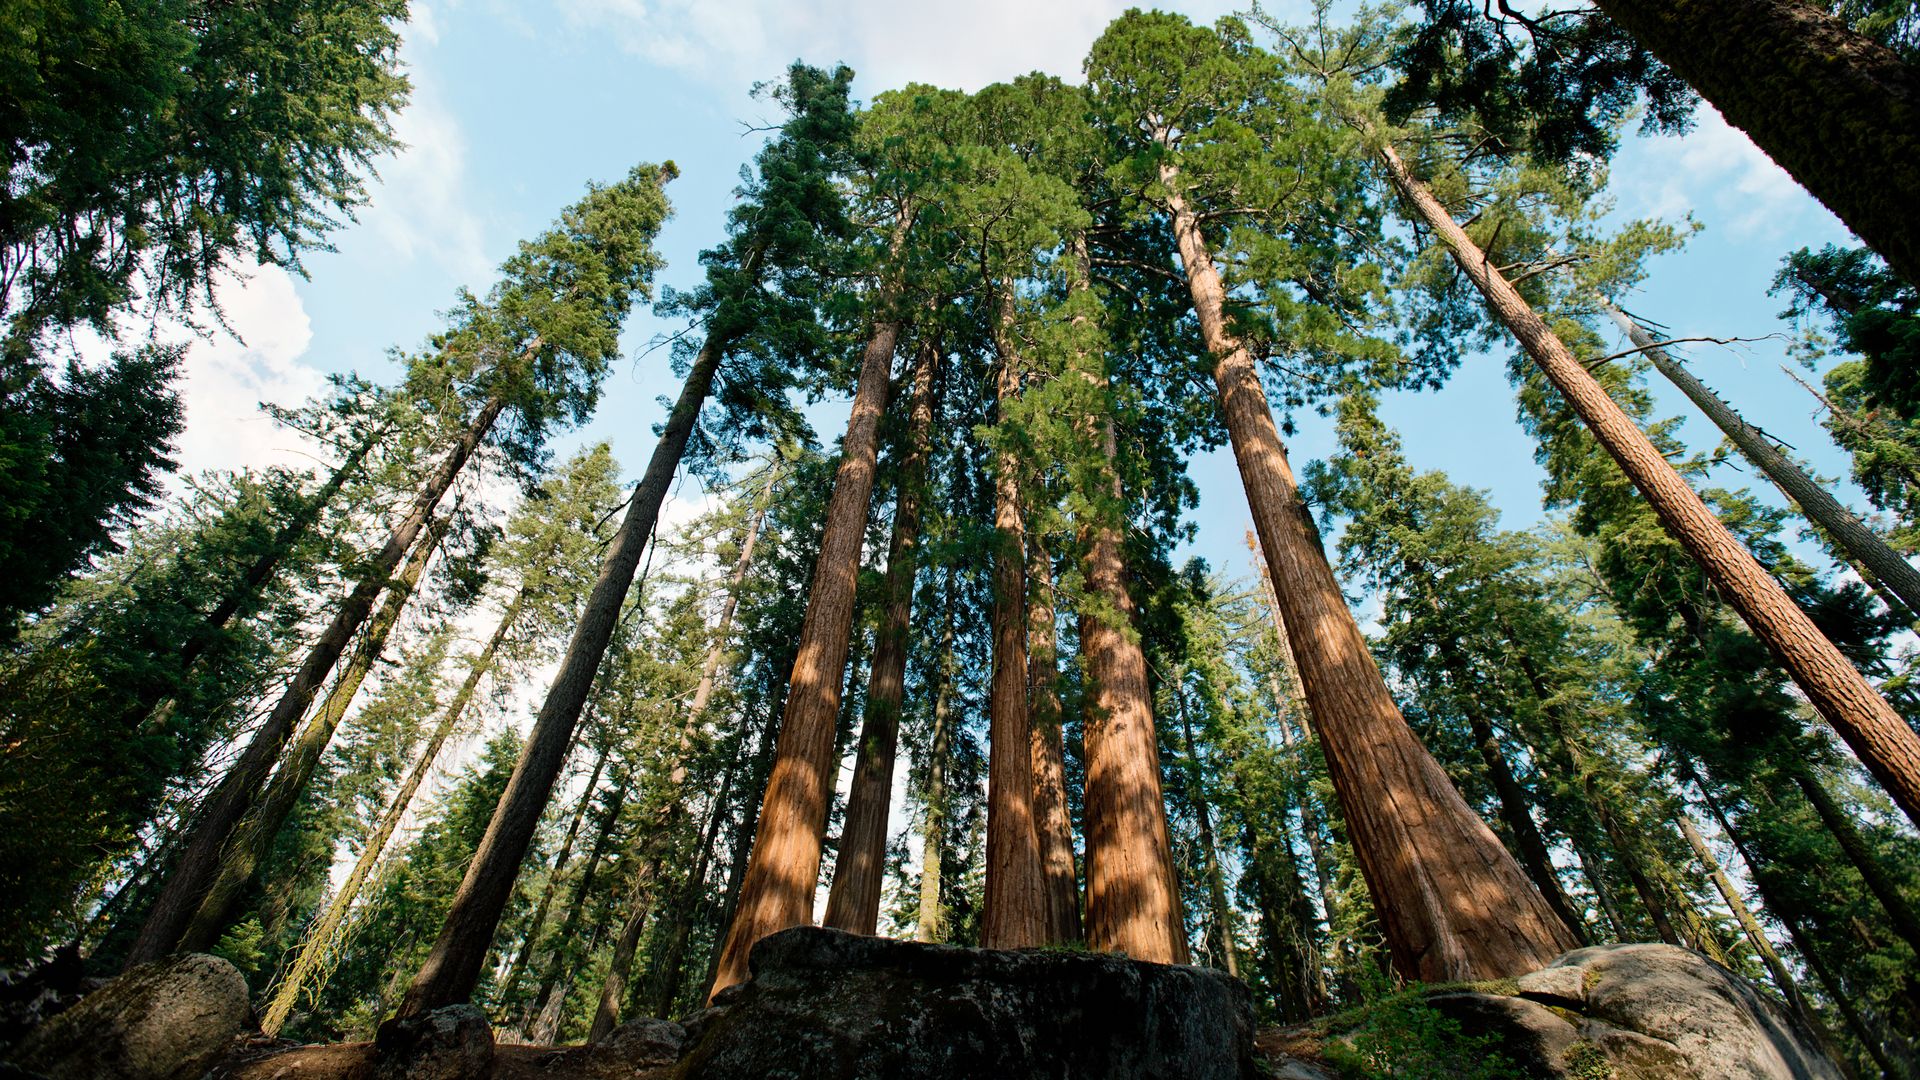 View of giant sequoias in Sequoia National Parks.